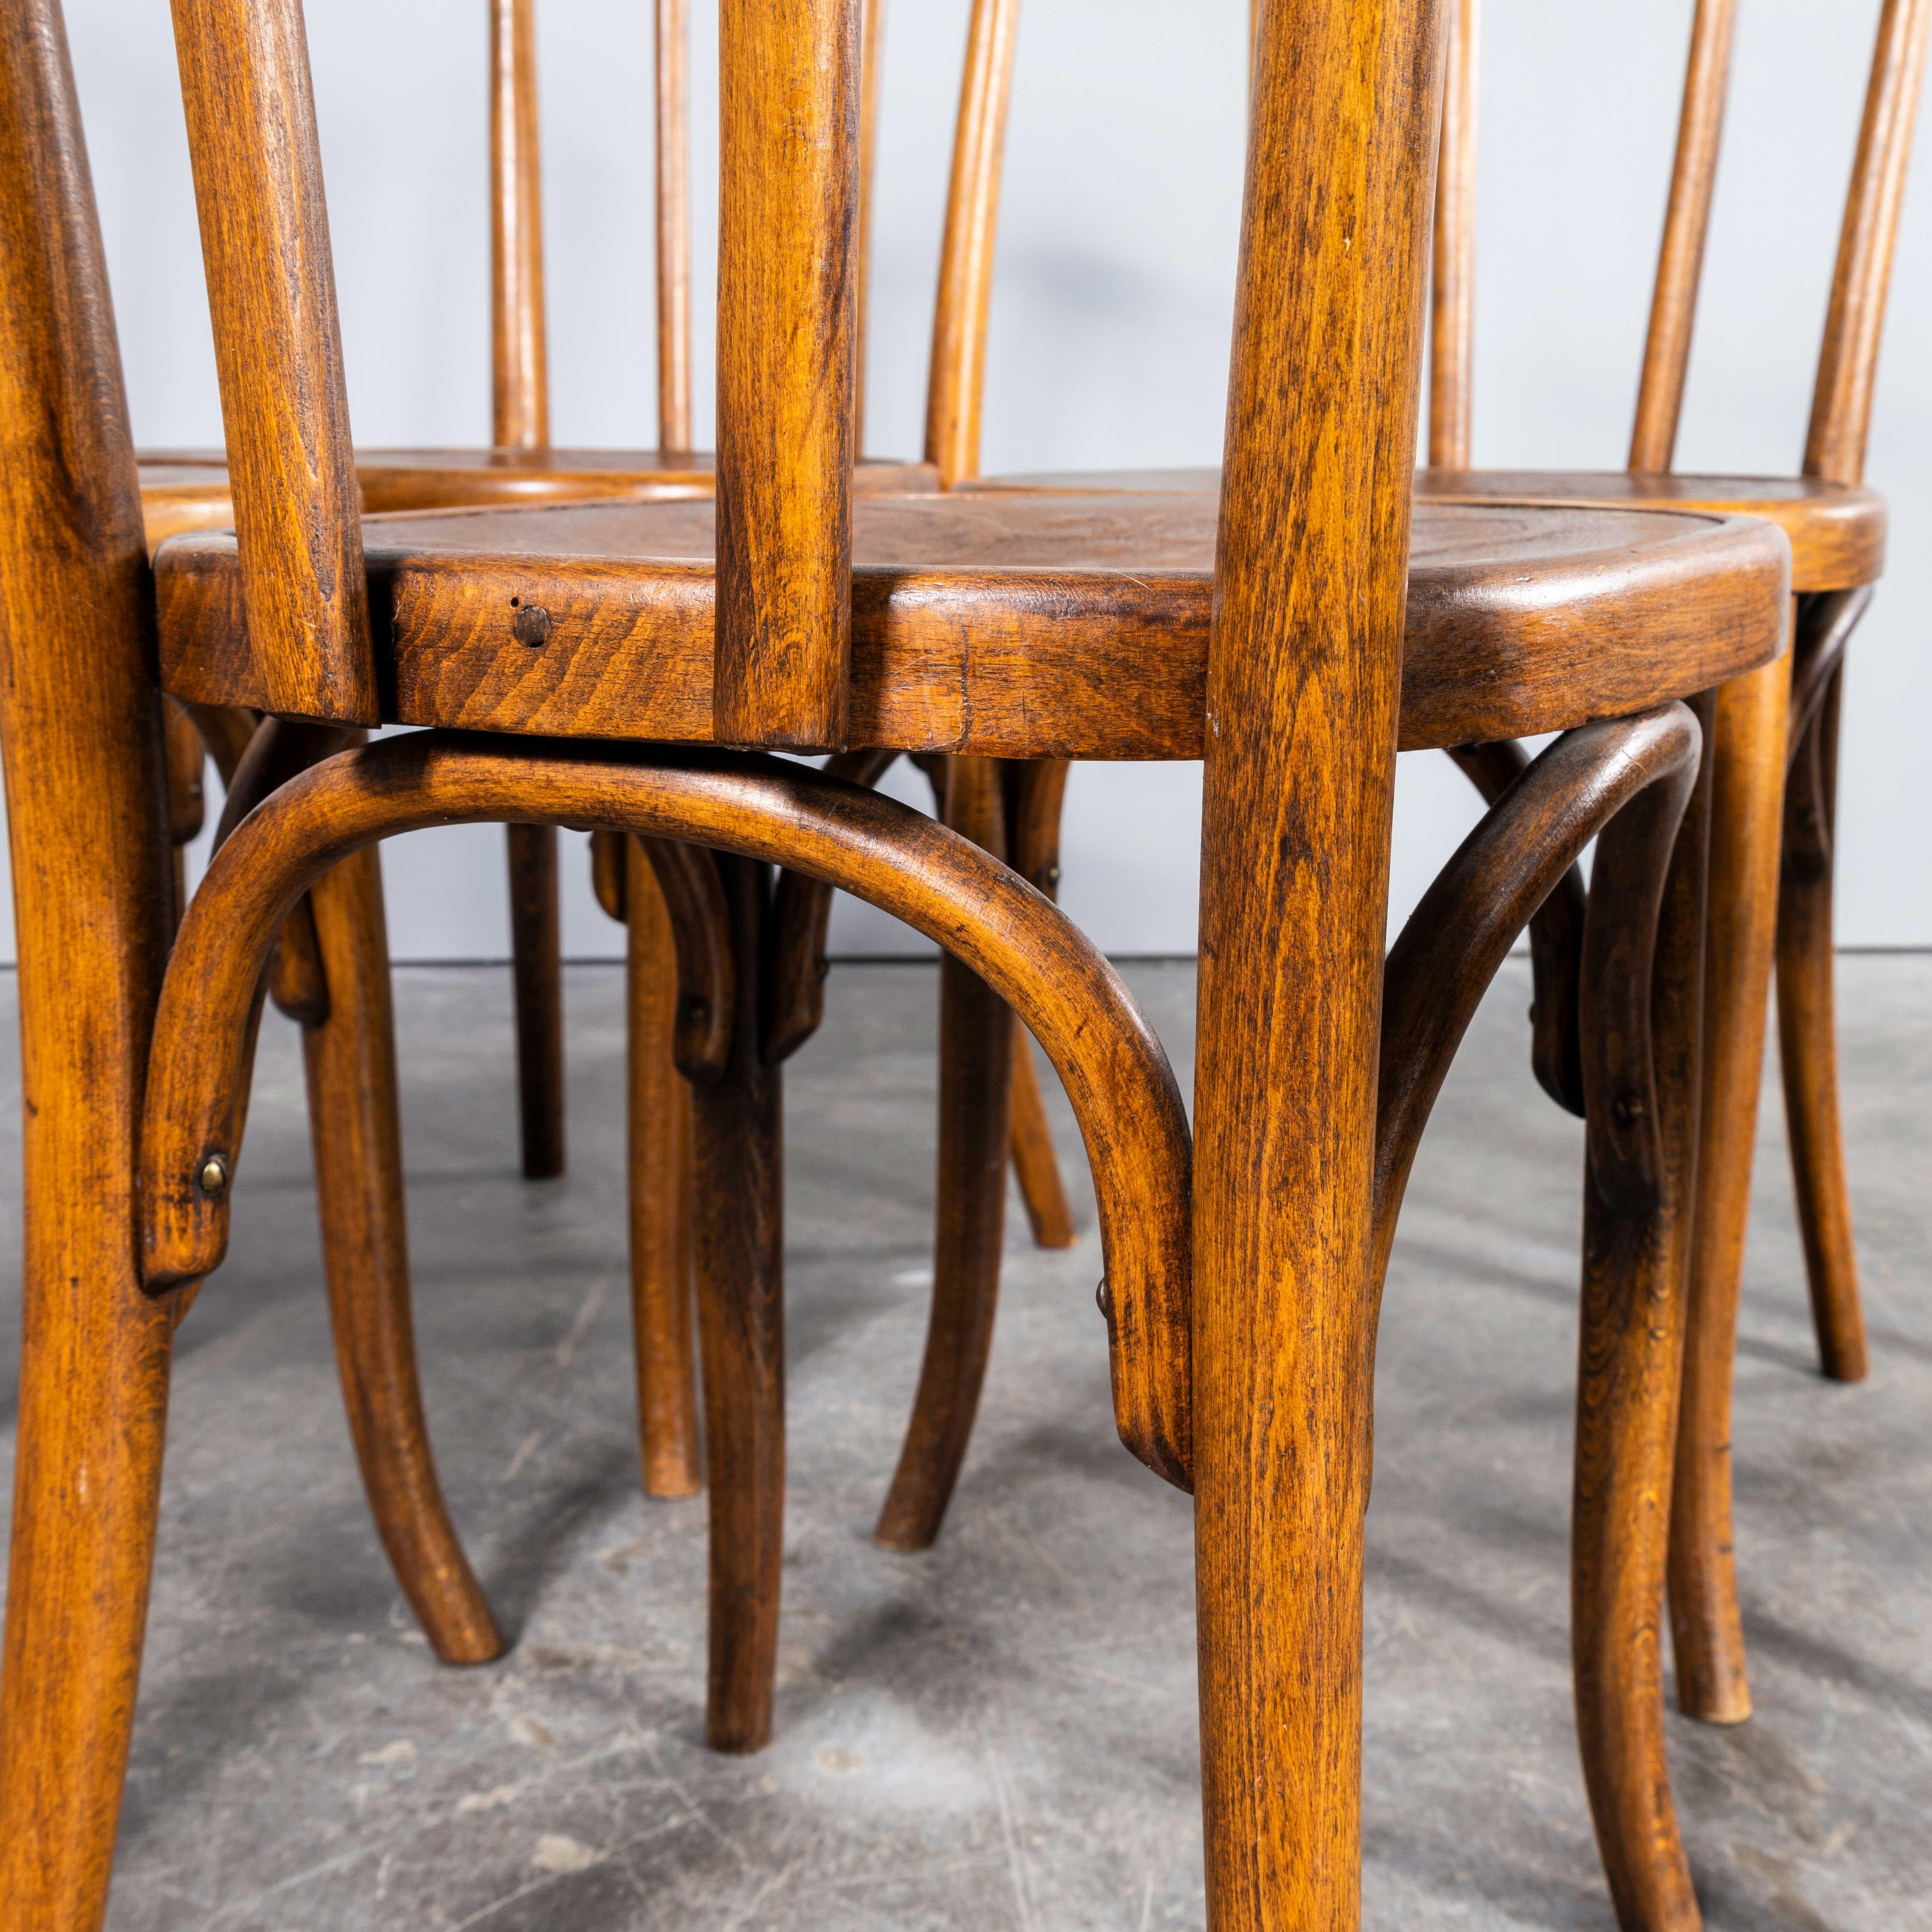 1940’s Fischel Original Single Hoop Bentwood Chairs – Set Of Six
1940’s Fischel Original Single Hoop Bentwood Chairs – Set Of Six. The process of steam bending beech to create elegant chairs was discovered and developed by Thonet, but when its